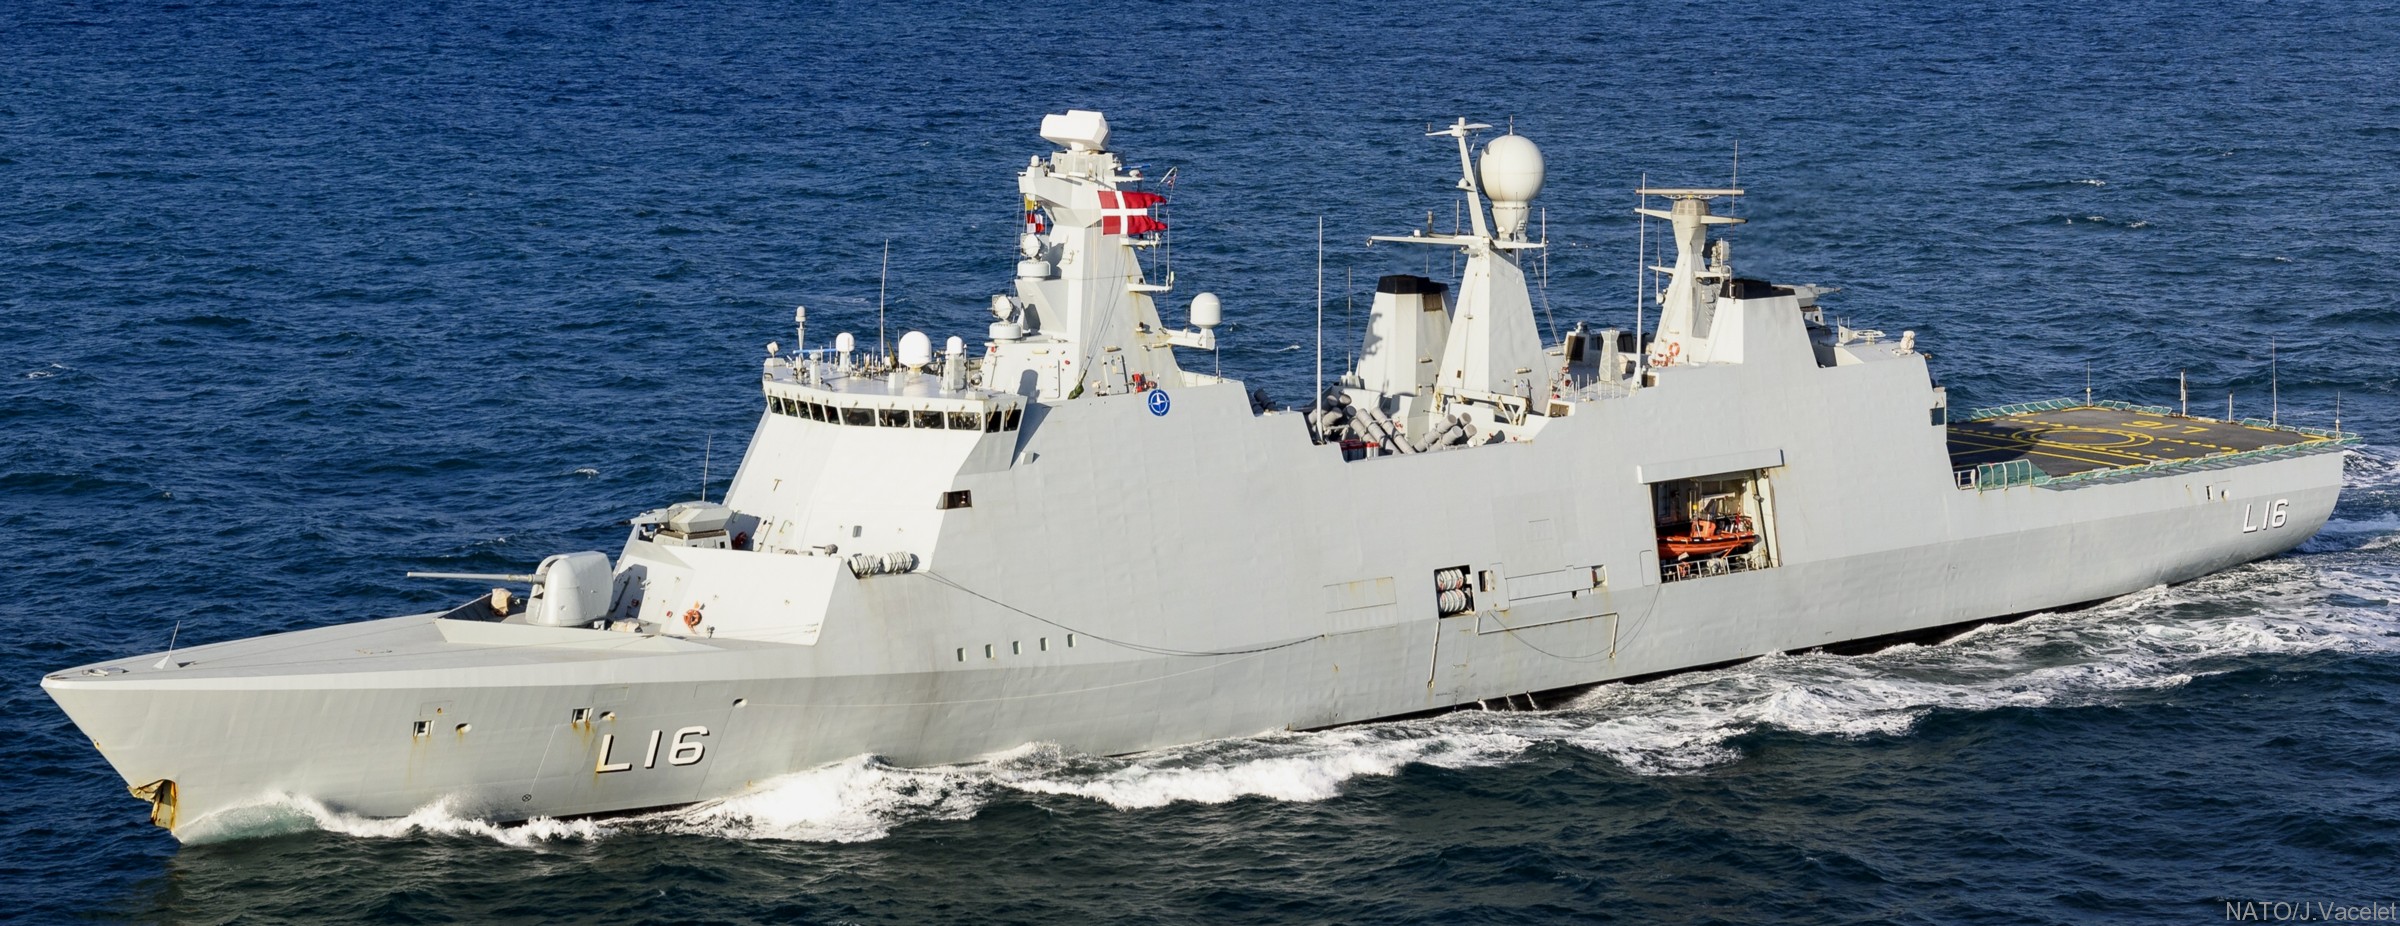 l-16 hdms absalon command support ship frigate royal danish navy 95